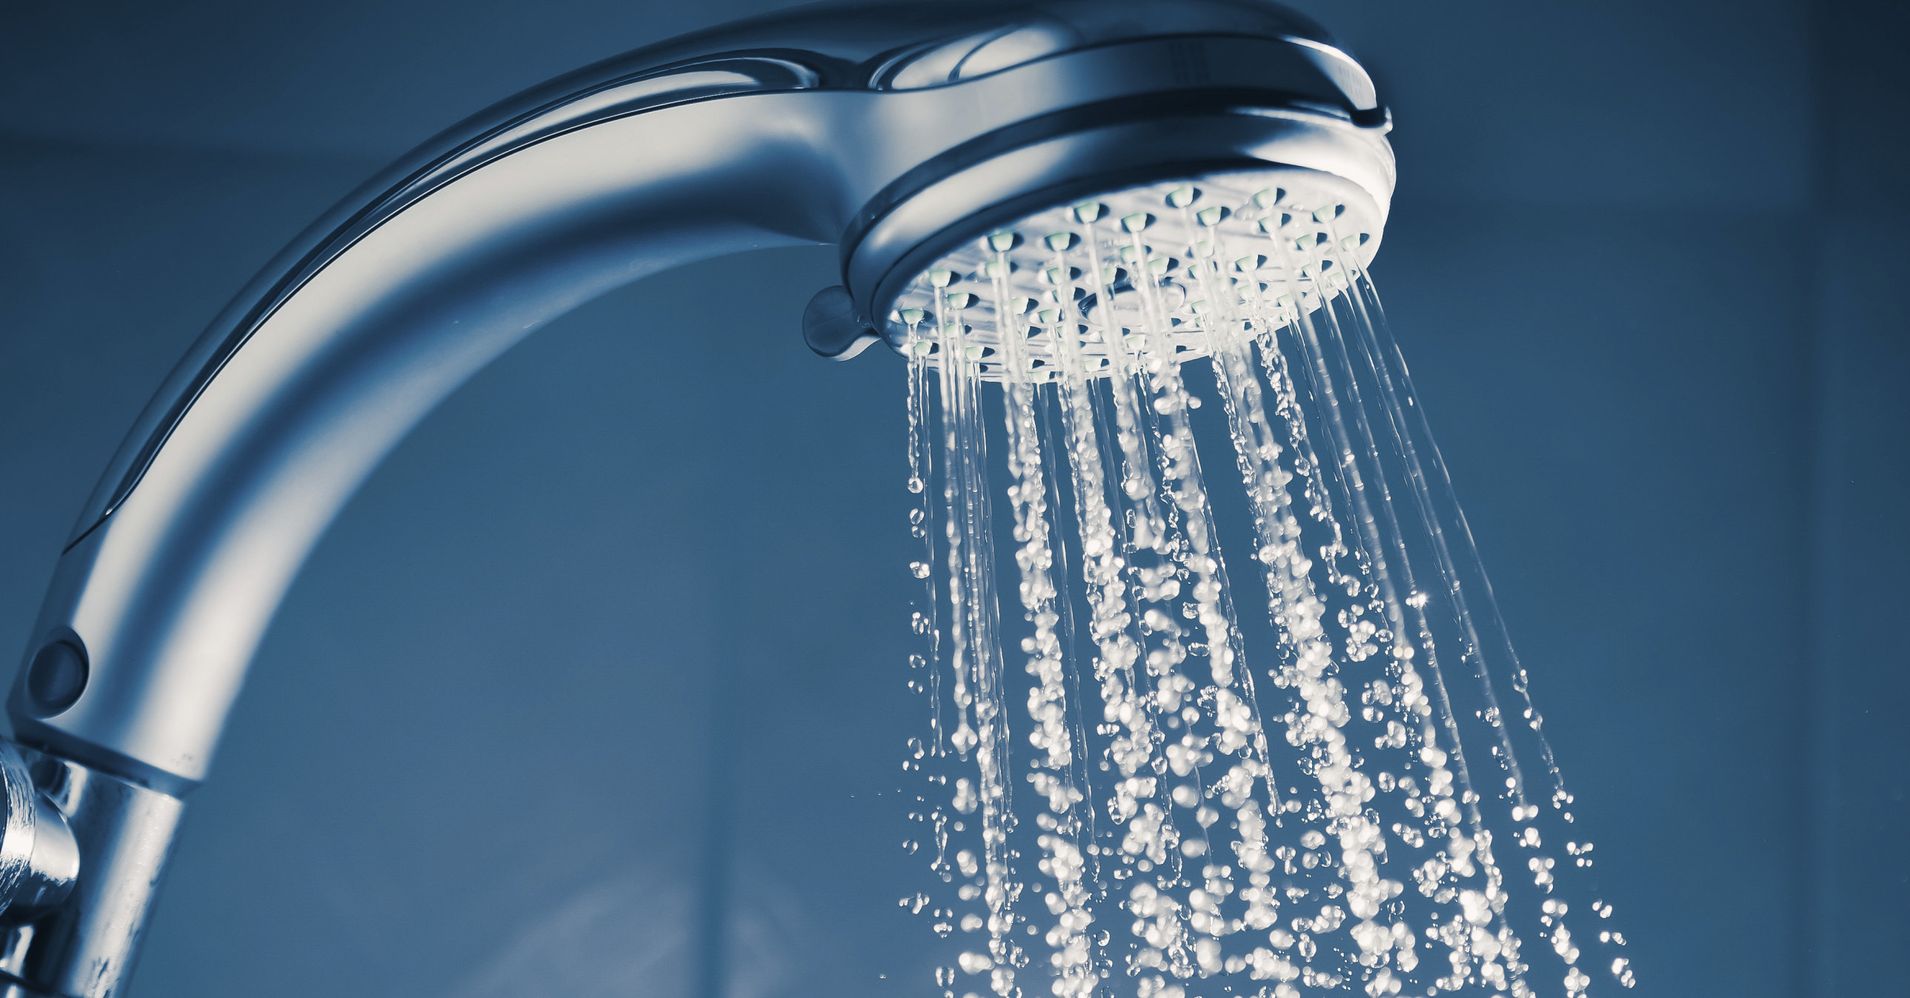 5 Shower Mistakes That Are Drying Out Your Skin Huffpost 